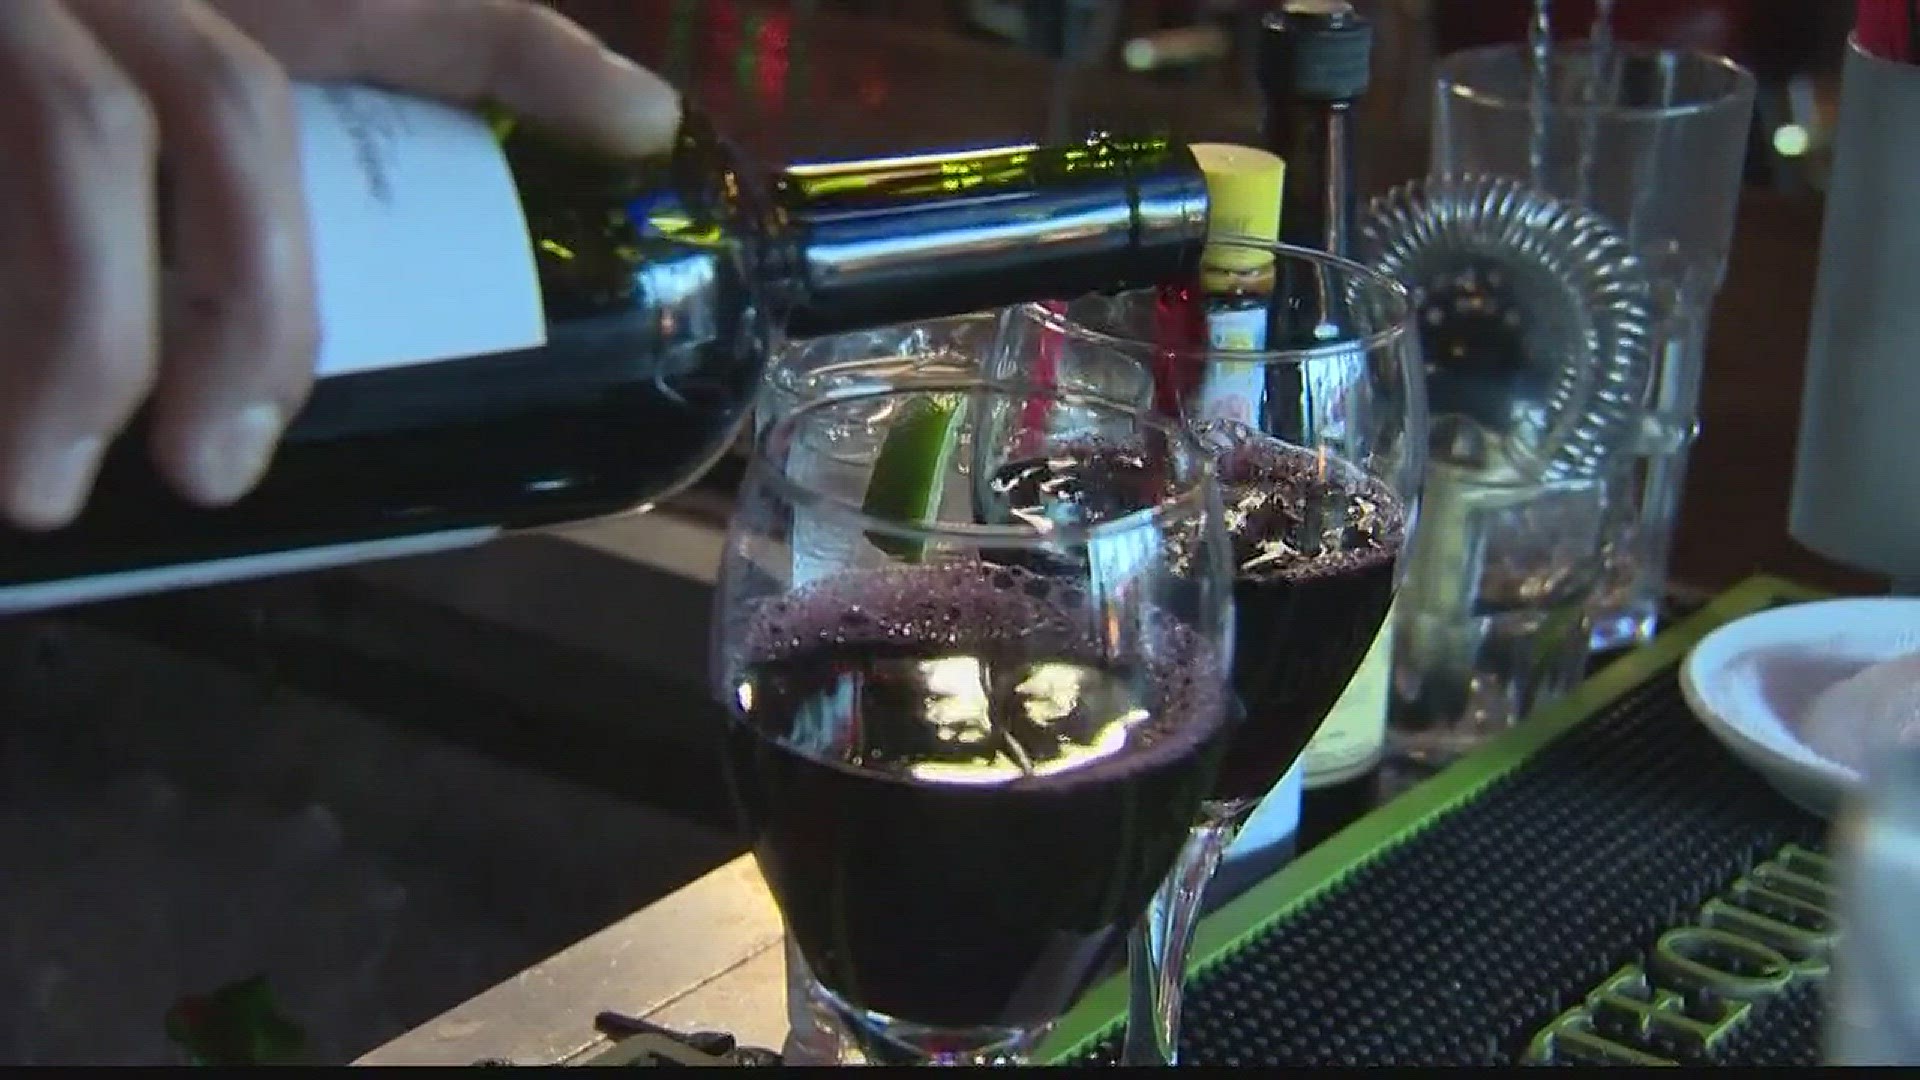 Customers nationwide could see some changes to their wine following the California wildfires.